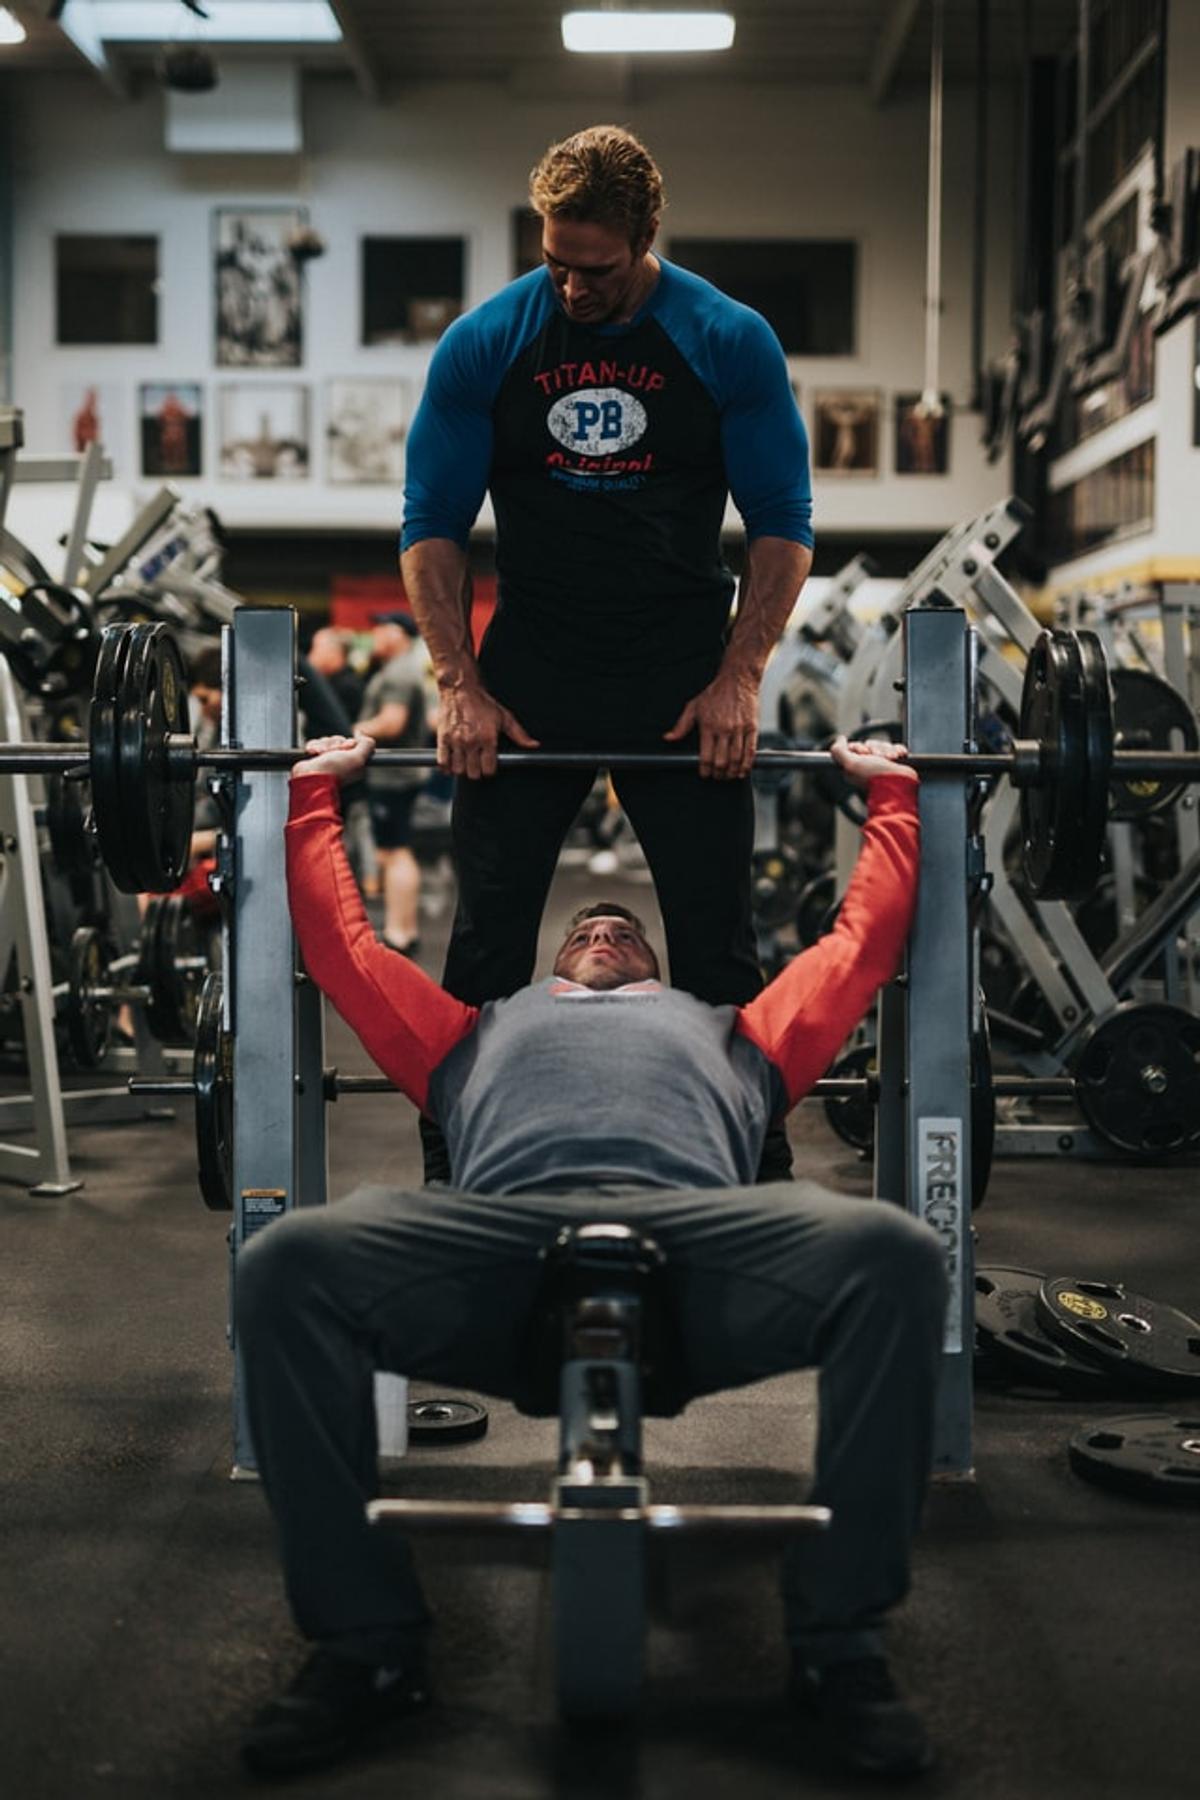 Trainer helping client with bench press form